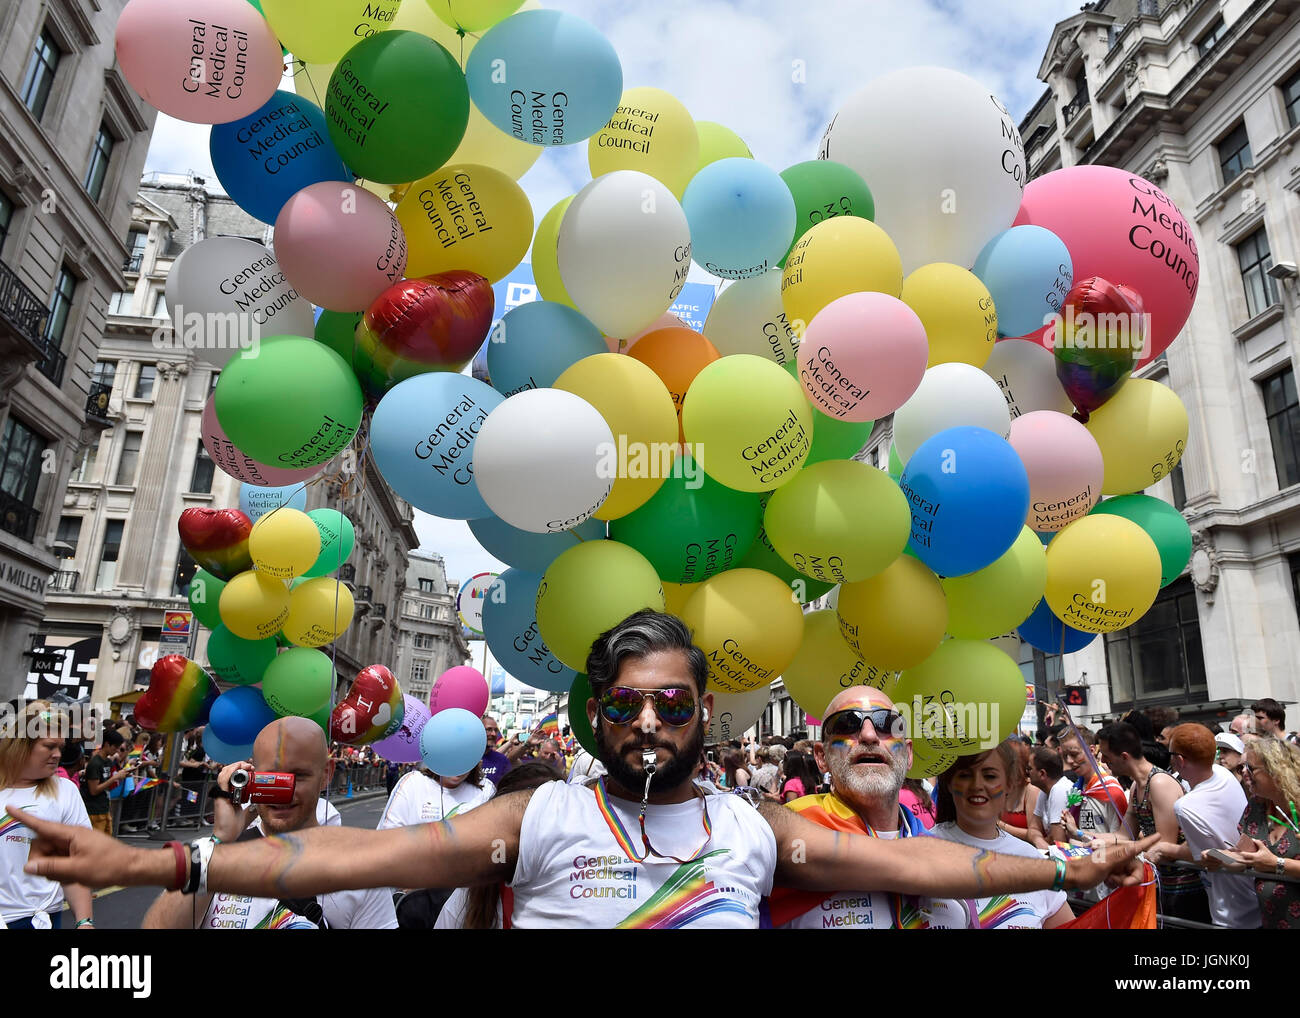 London, UK. 08th July, 2017. A member of General Medical Council holds a huge balloons during Pride In London on Saturday. Photo : Taka G Wu Credit: Taka Wu/Alamy Live News Stock Photo